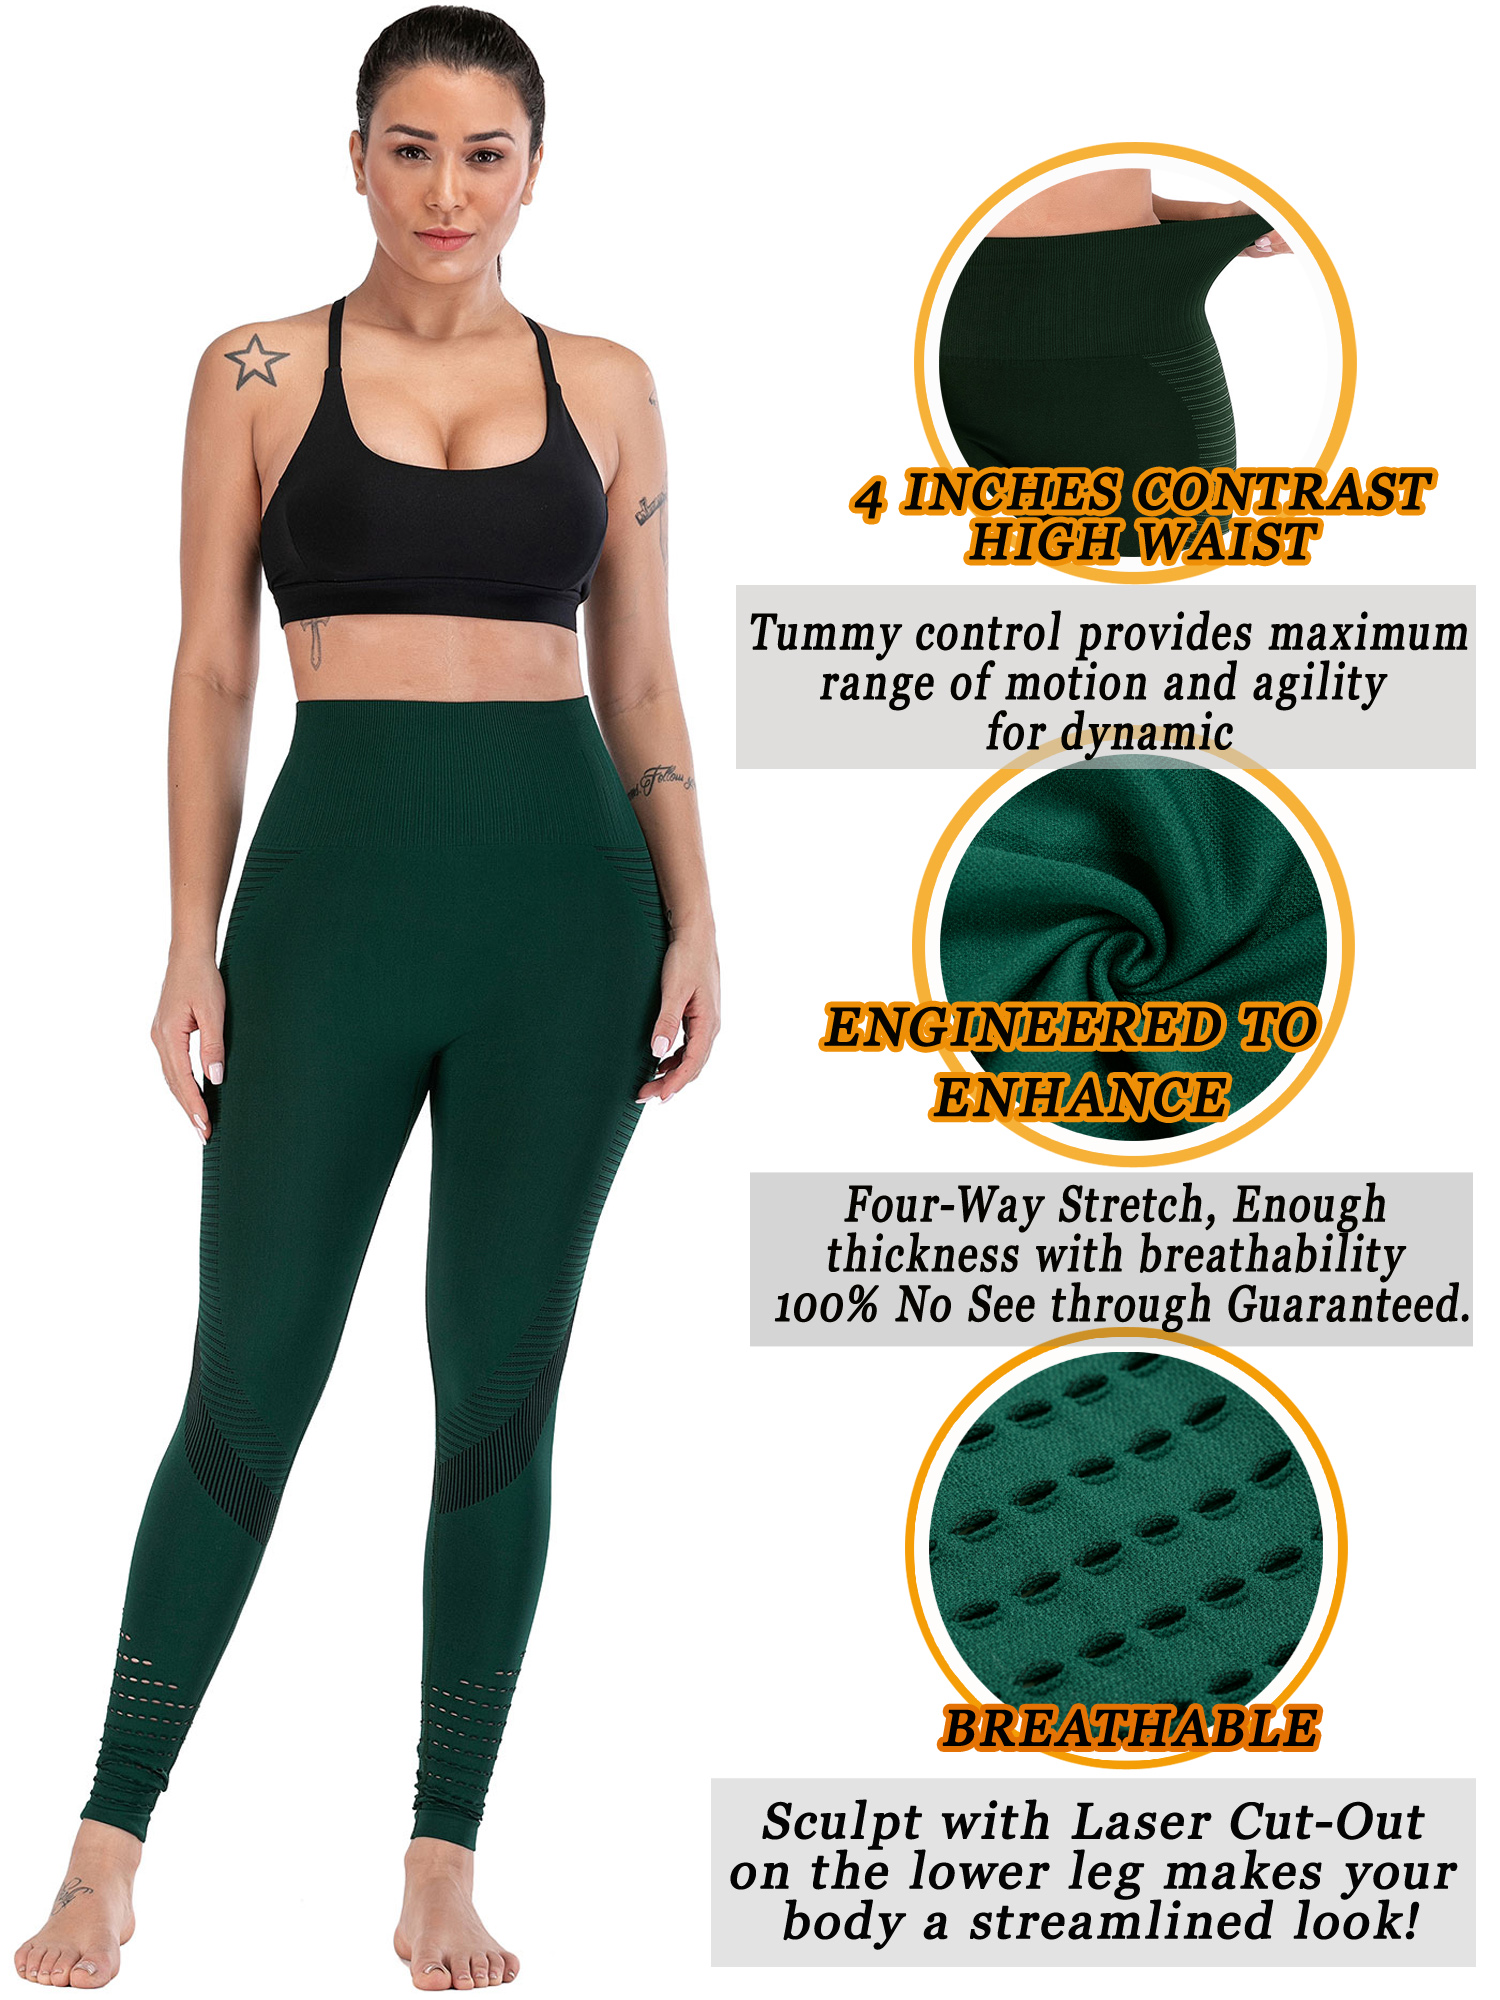 DODOING Womens Sport Compression Fitness Leggings Running Yoga Jogging Gym Pants Waist Pants Exercise Workout High Stretchy and High Waist Trousers, Black/ Green/ Grey - image 3 of 6